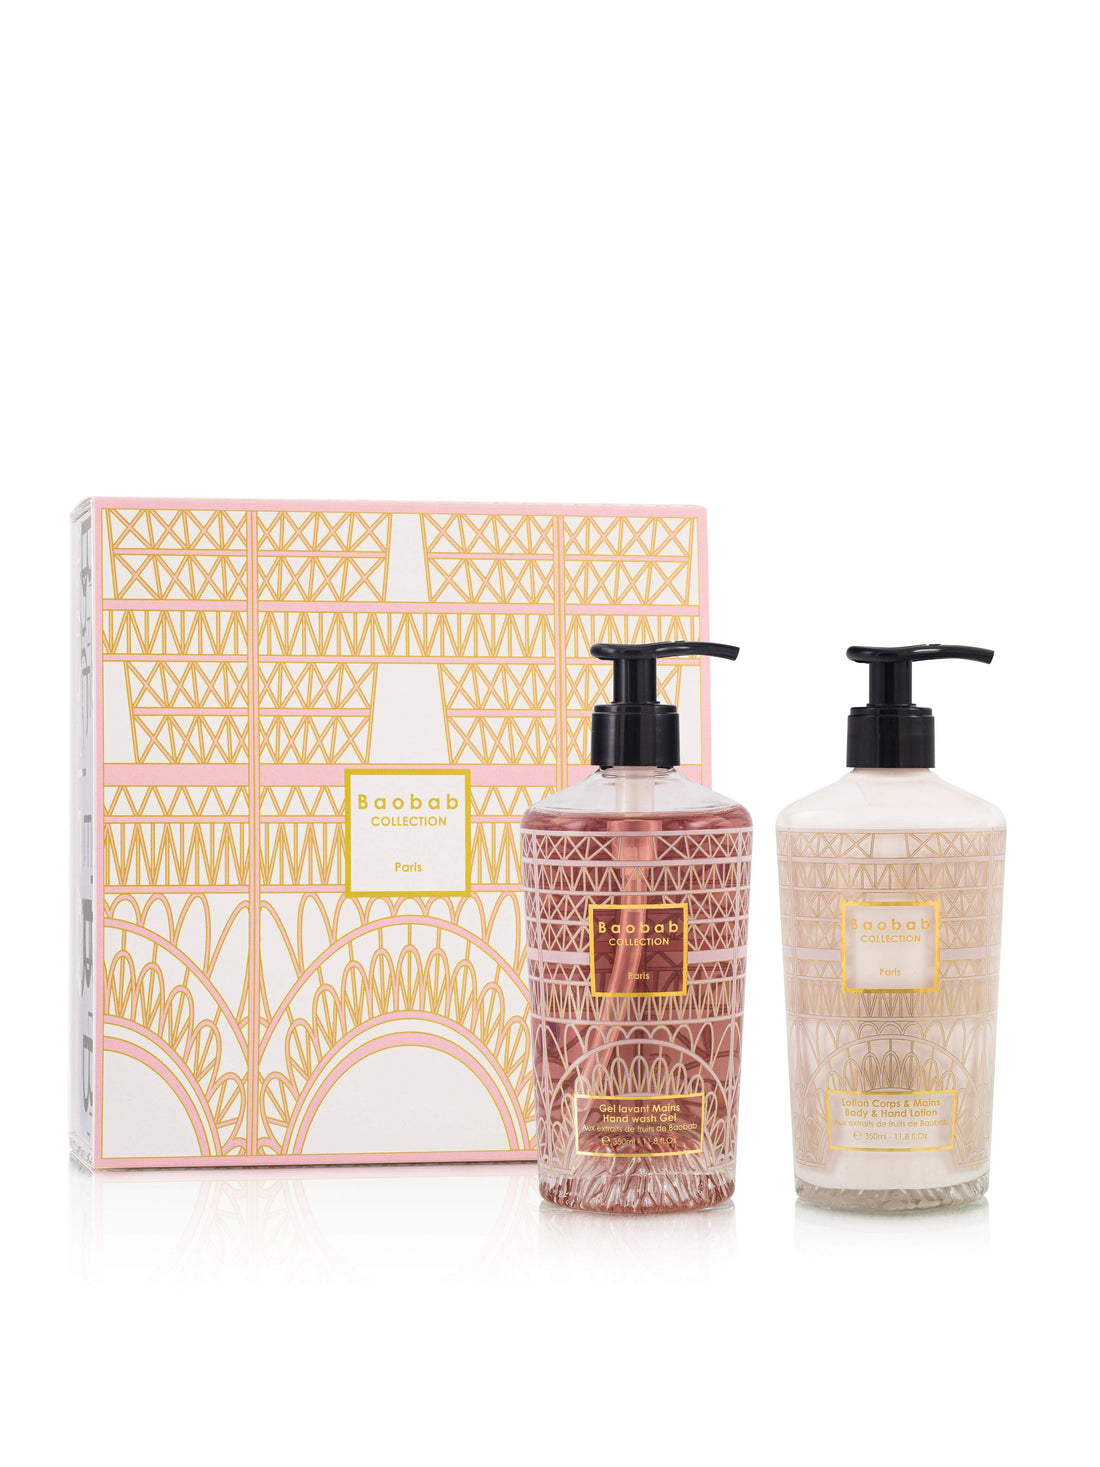 GIFT BOX PARIS BODY & HAND LOTION AND HAND WASH GEL